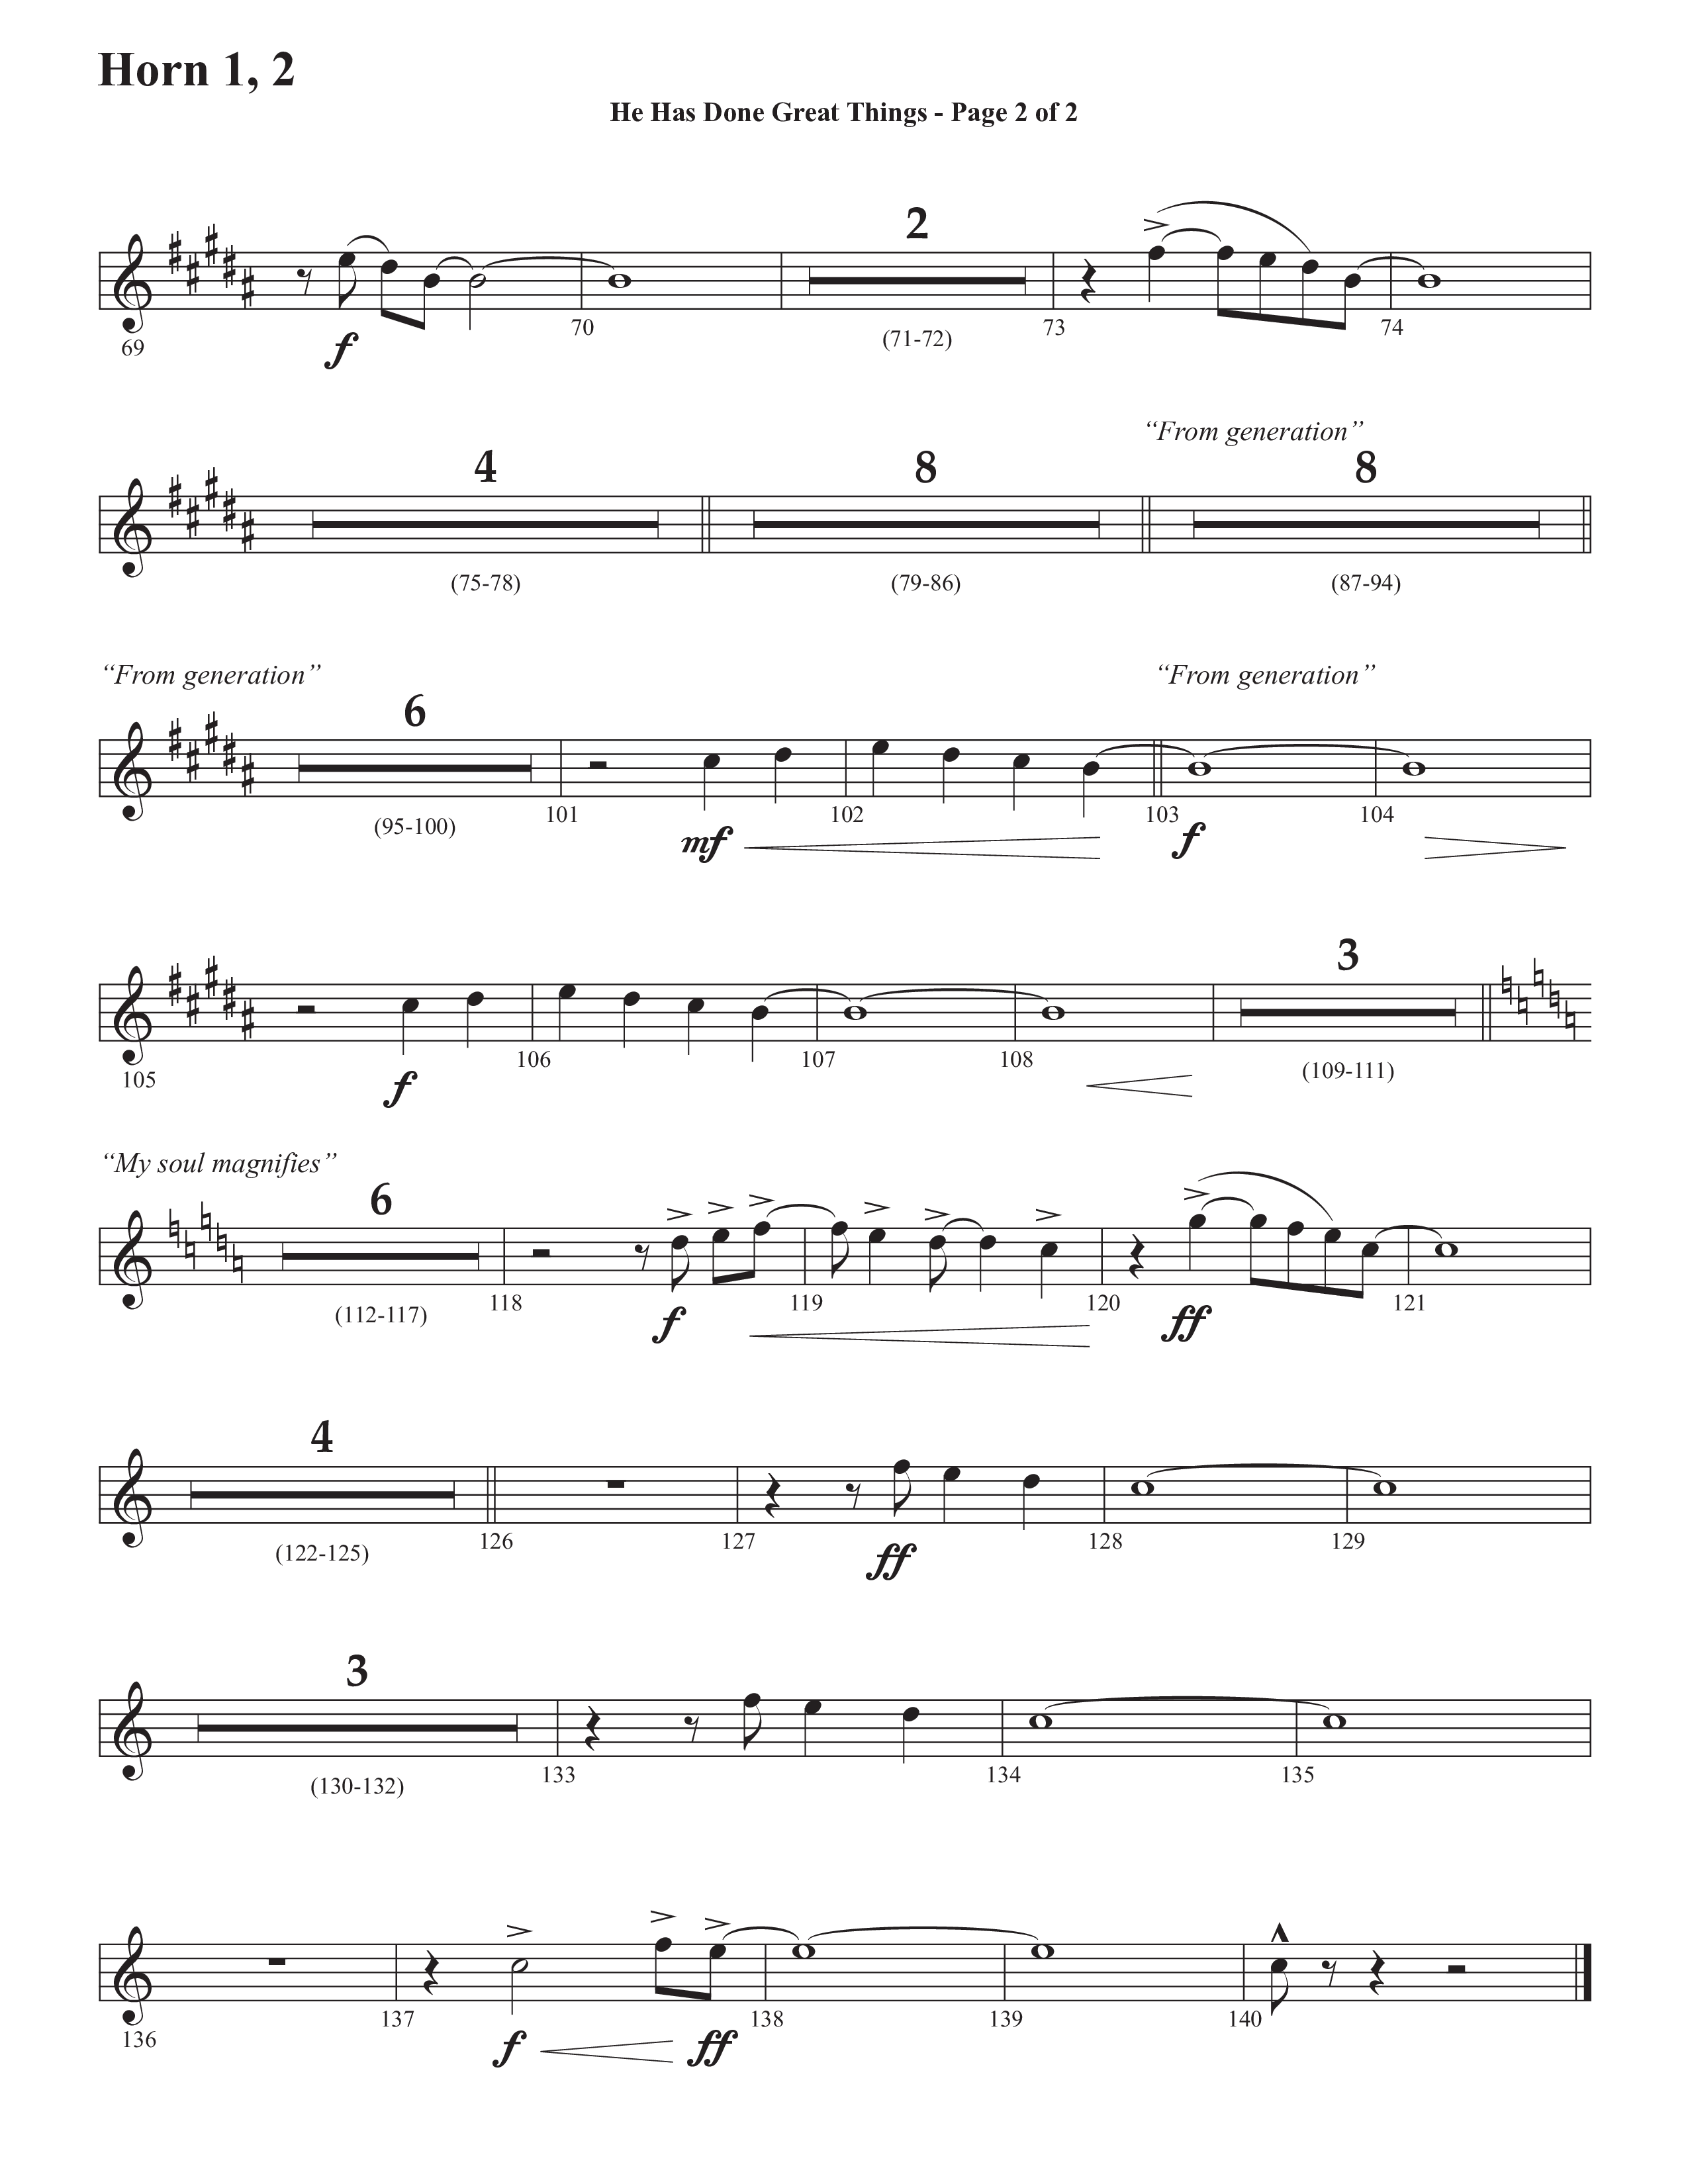 He Has Done Great Things (The Magnificat) (Choral Anthem SATB) French Horn 1/2 (Semsen Music / Arr. John Bolin / Orch. Cliff Duren)